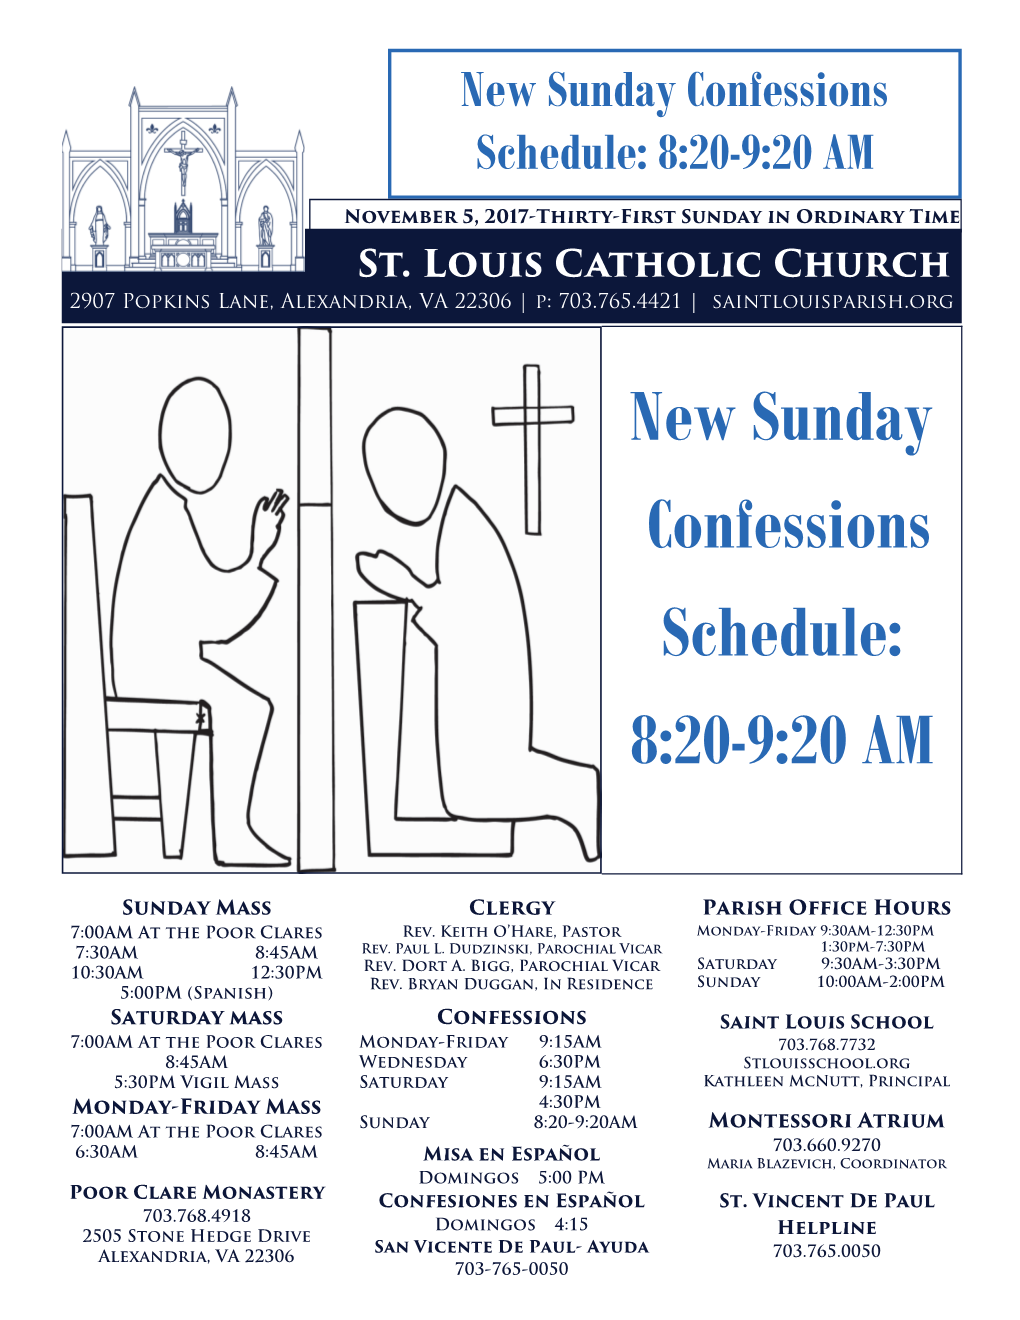 Ew Sunday Confessions Schedule